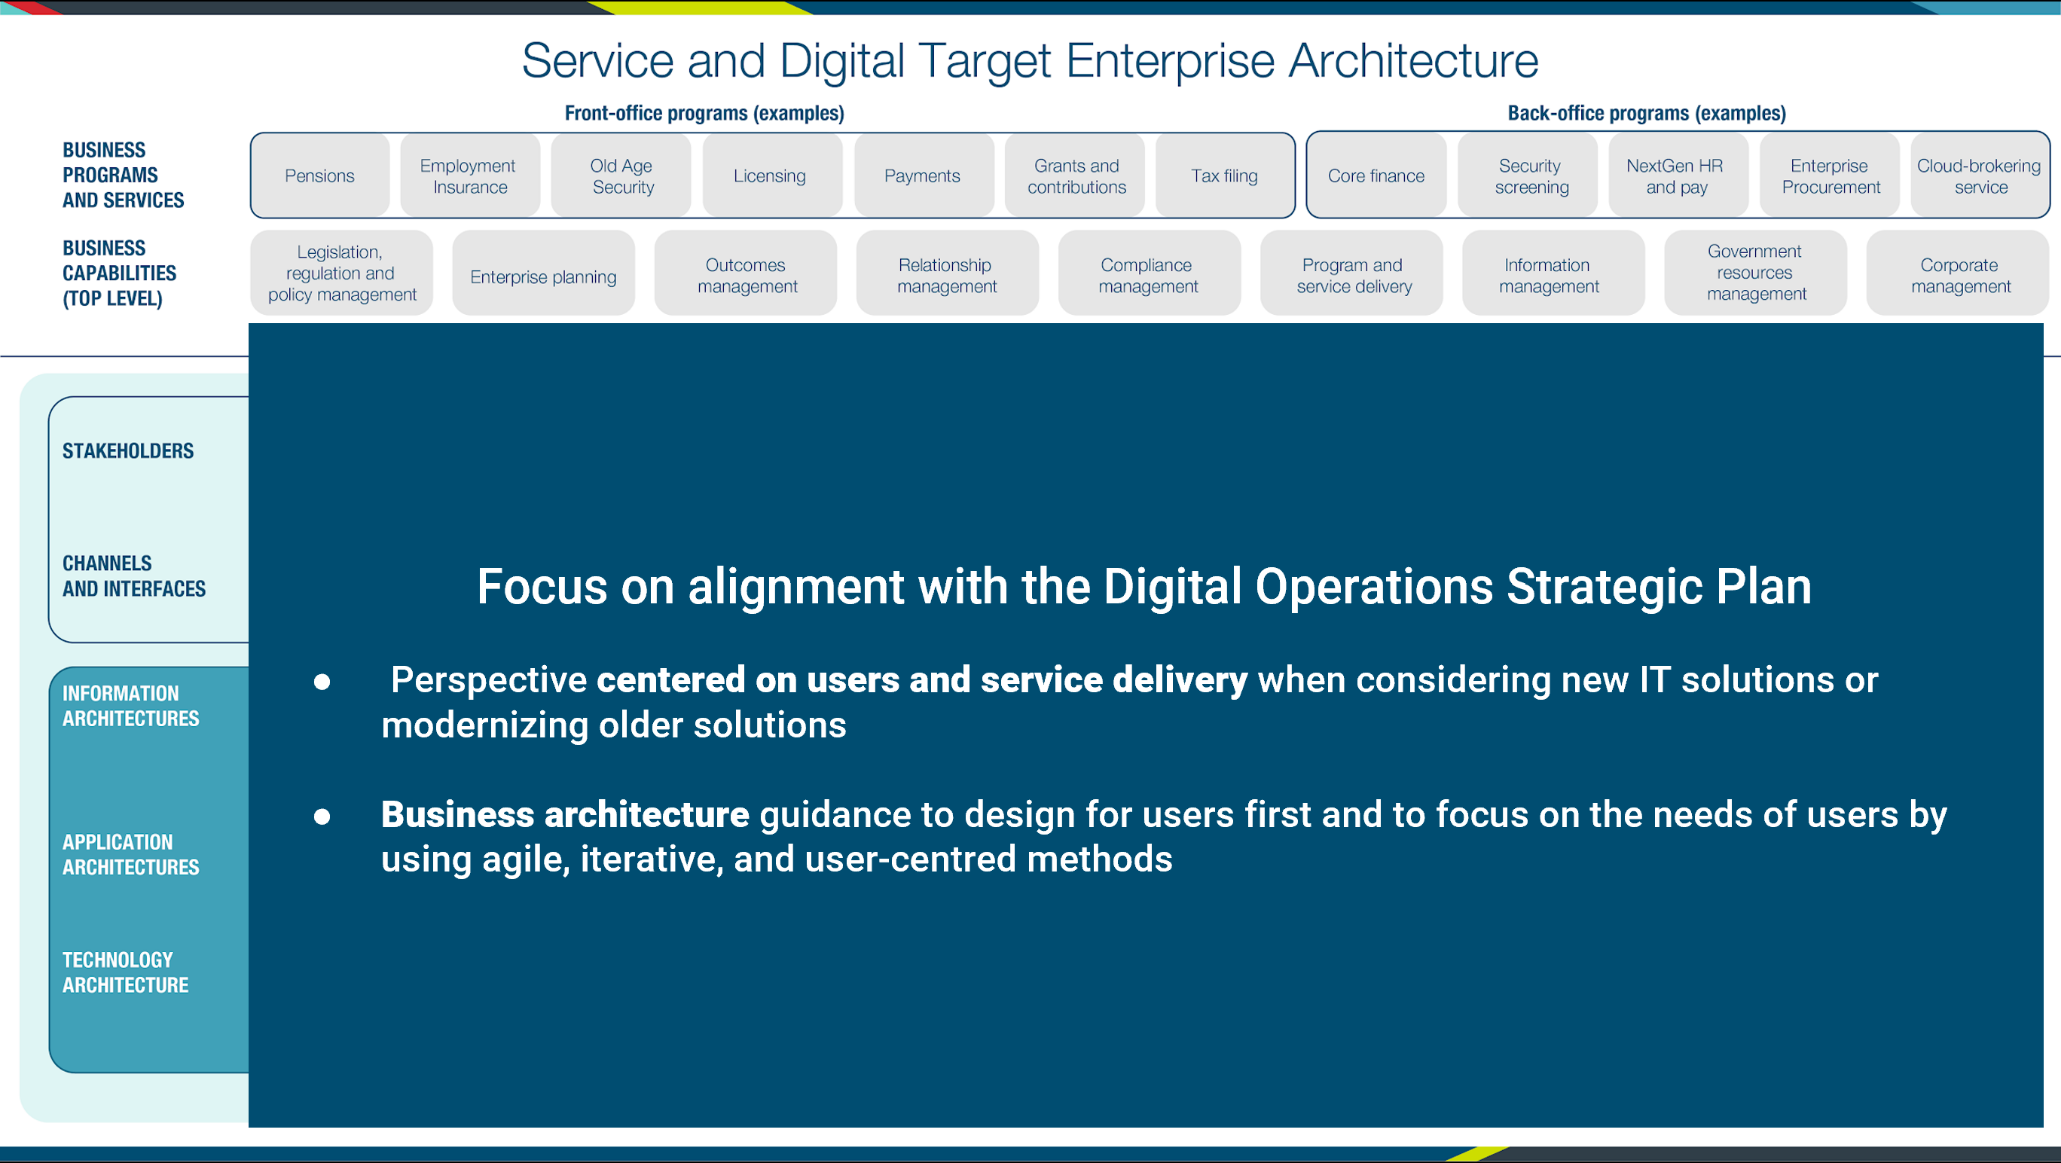 Focus on alignment with the Digital Operations Strategic Plan. Text version below: